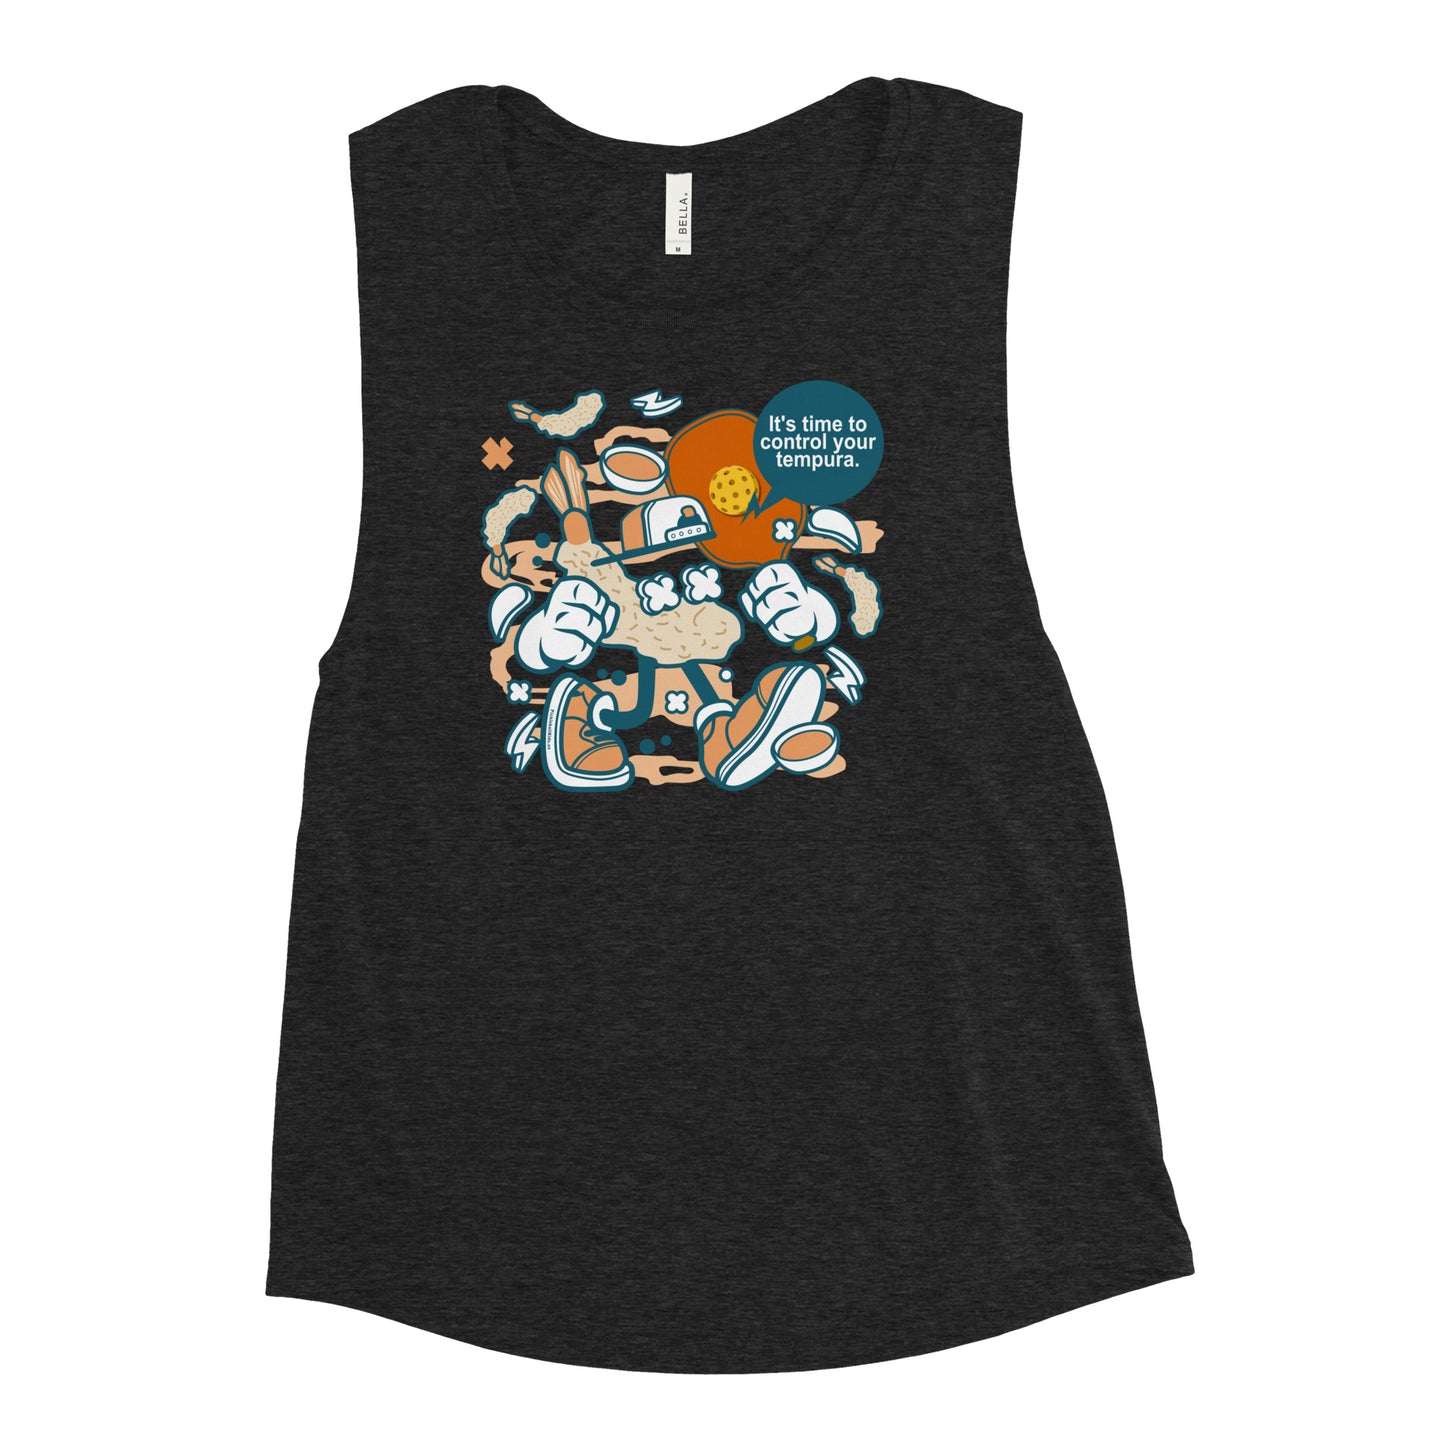 Ladies’  Pickleball Muscle Tank, "It's Time To Control Your Tempura."